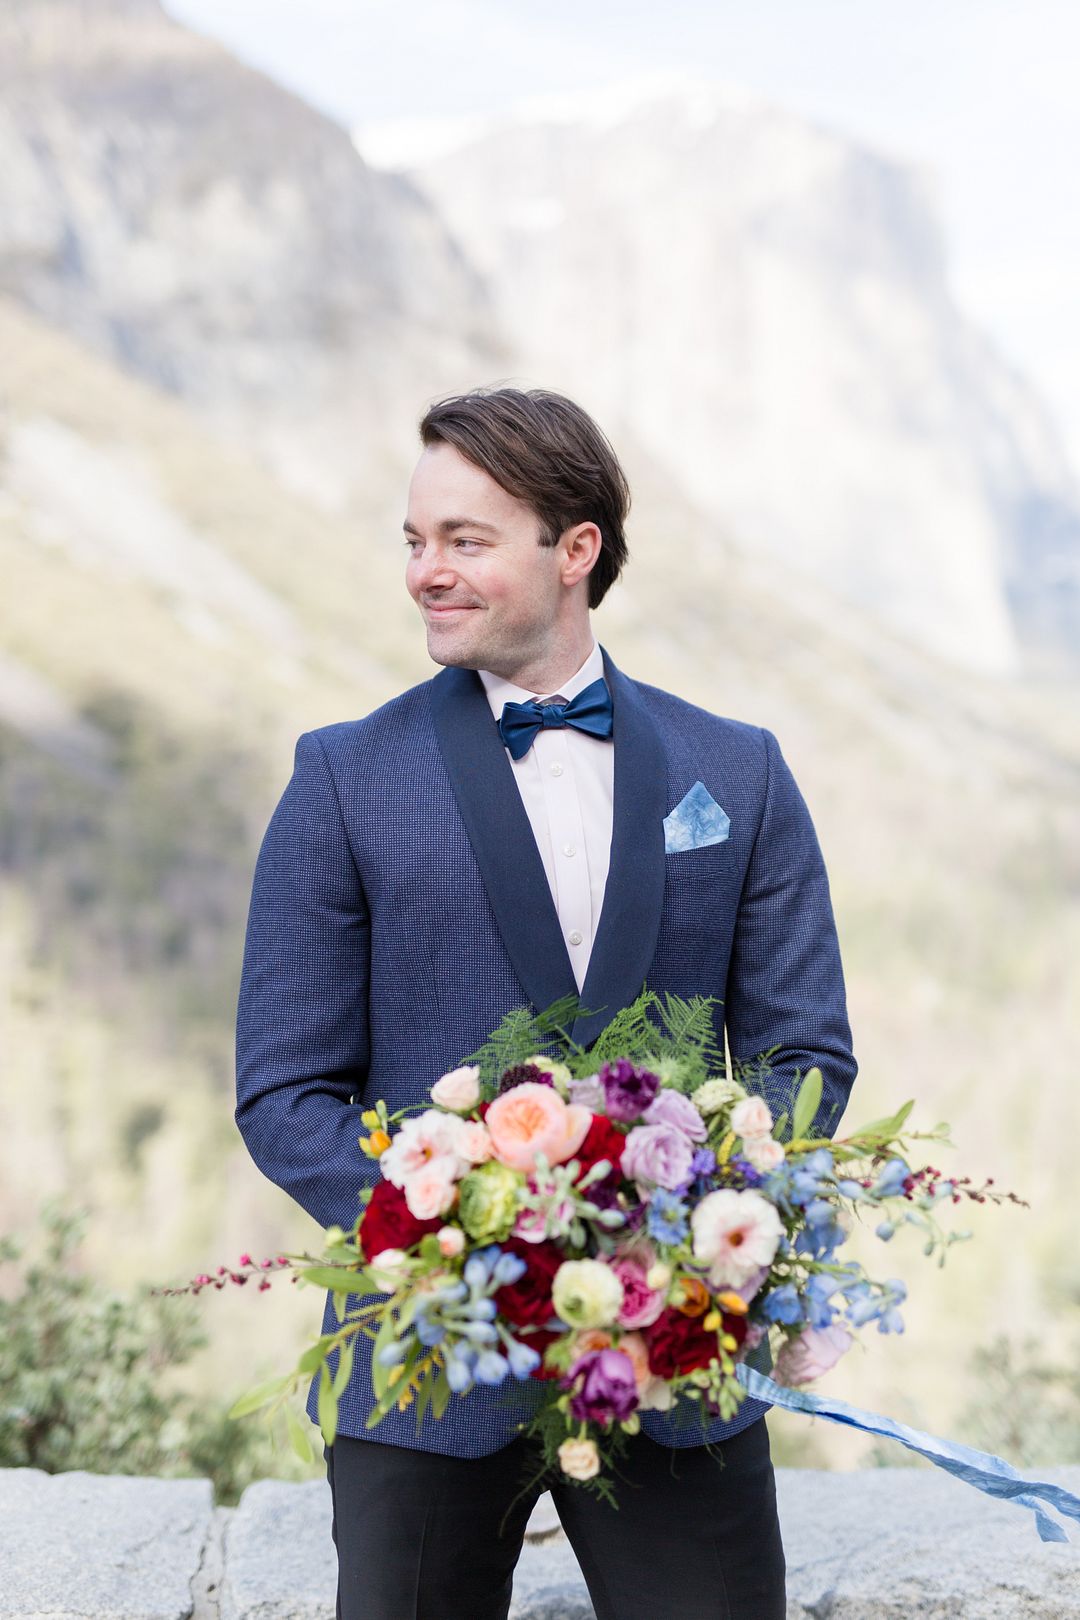 The groom was wearing a grey printed tux with black lapels, a navy bow tie and black pants